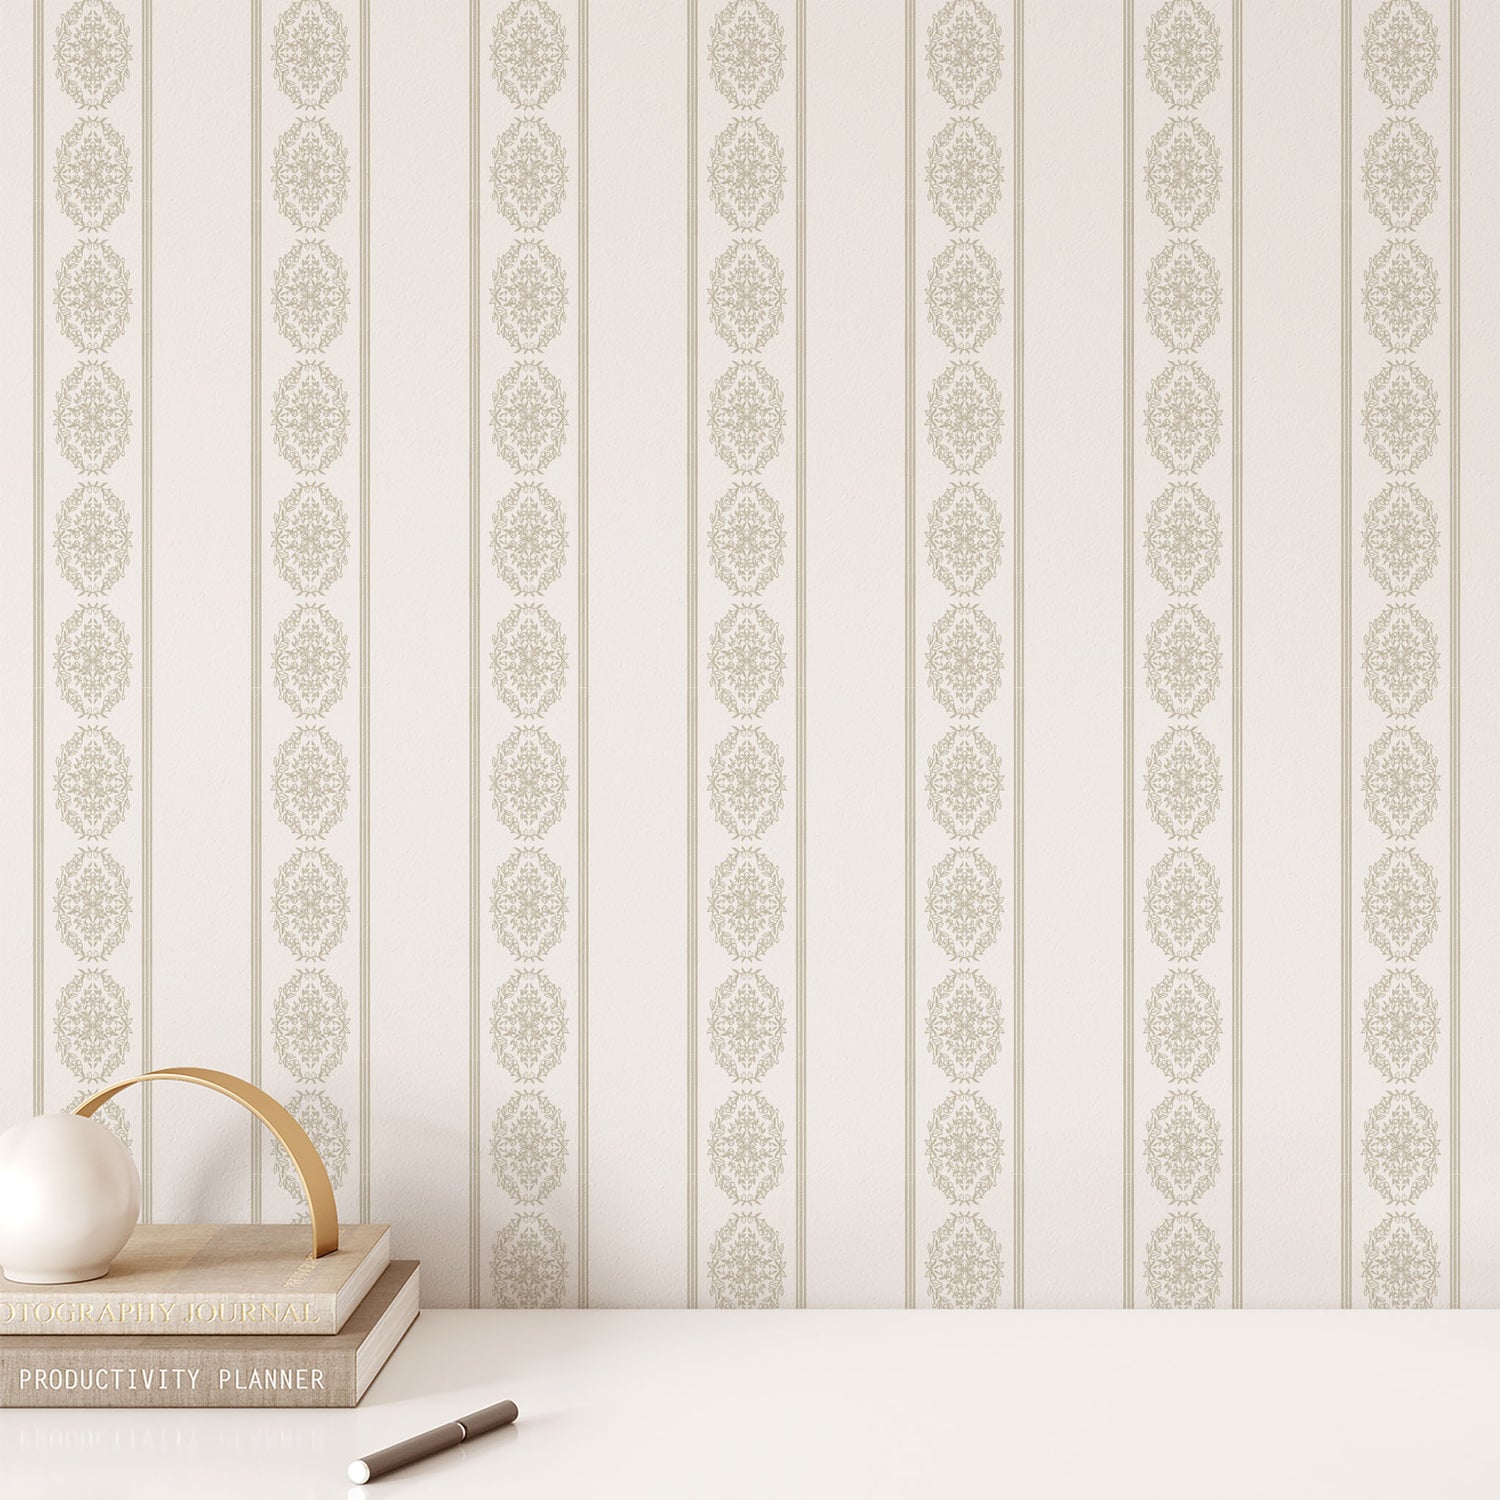 Upgrade your home decor with Milton Wallpaper. Its high-end look and stunning design will elevate any room. Made with top-quality materials, this wallpaper is the perfect choice for adding a touch of elegance to your space. Transform your walls and create a beautiful, sophisticated atmosphere shown full size image.